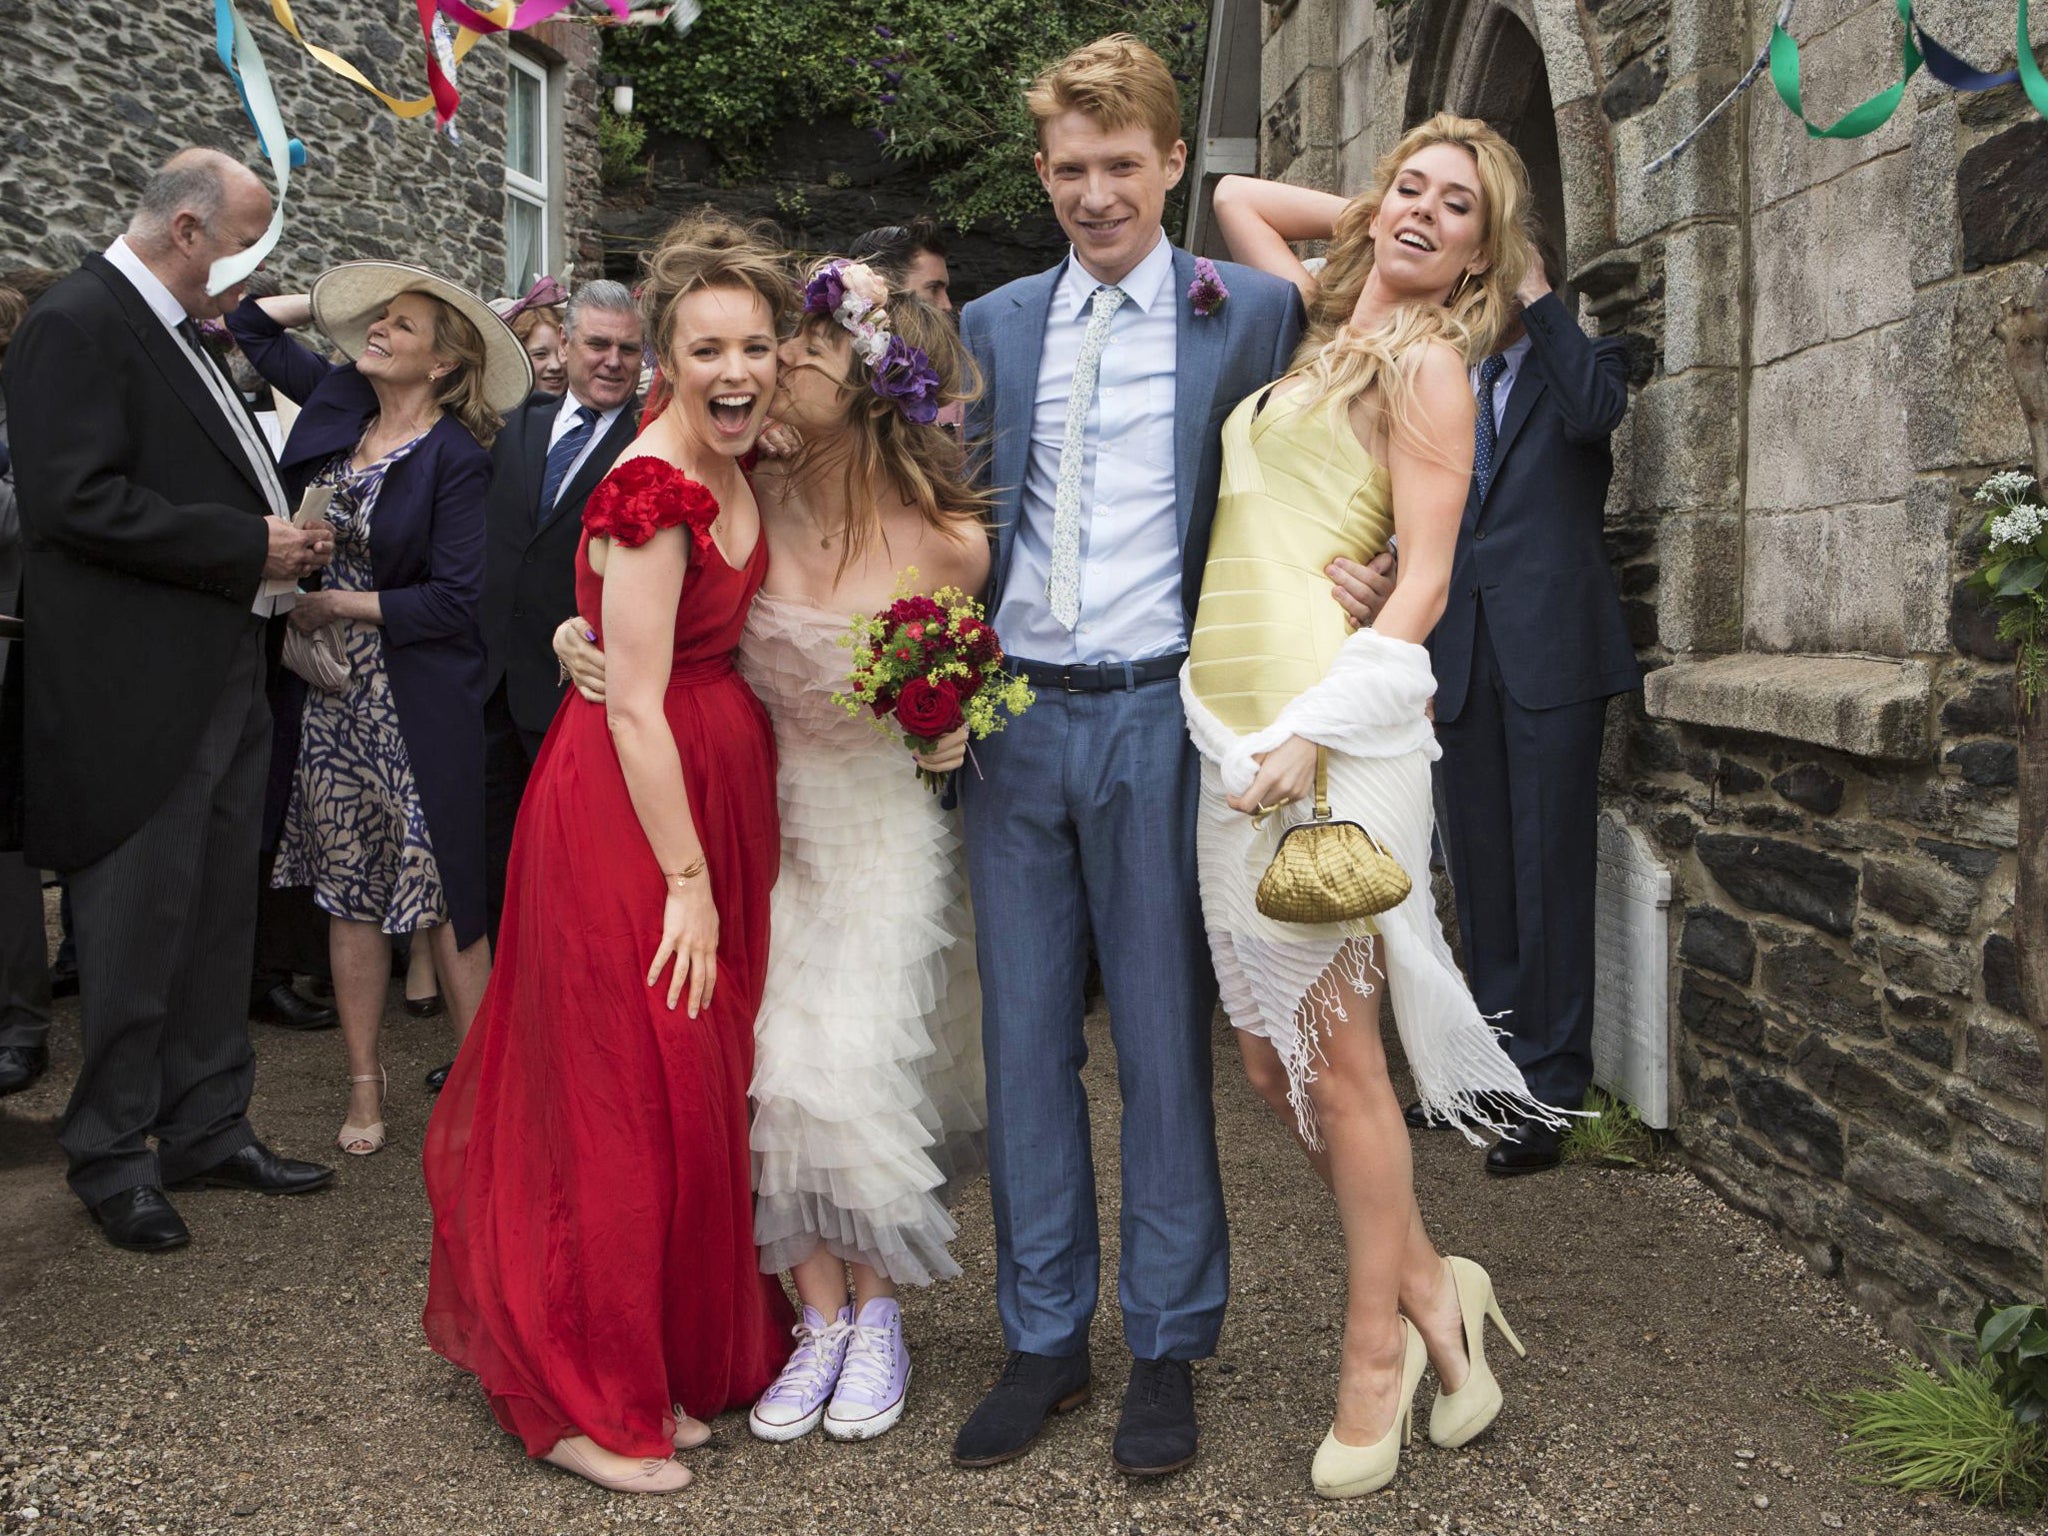 Kiss of death: Rachel McAdams, Margot Robbie, Domhnall Gleeson and Vanessa Kirby in 'About Time'